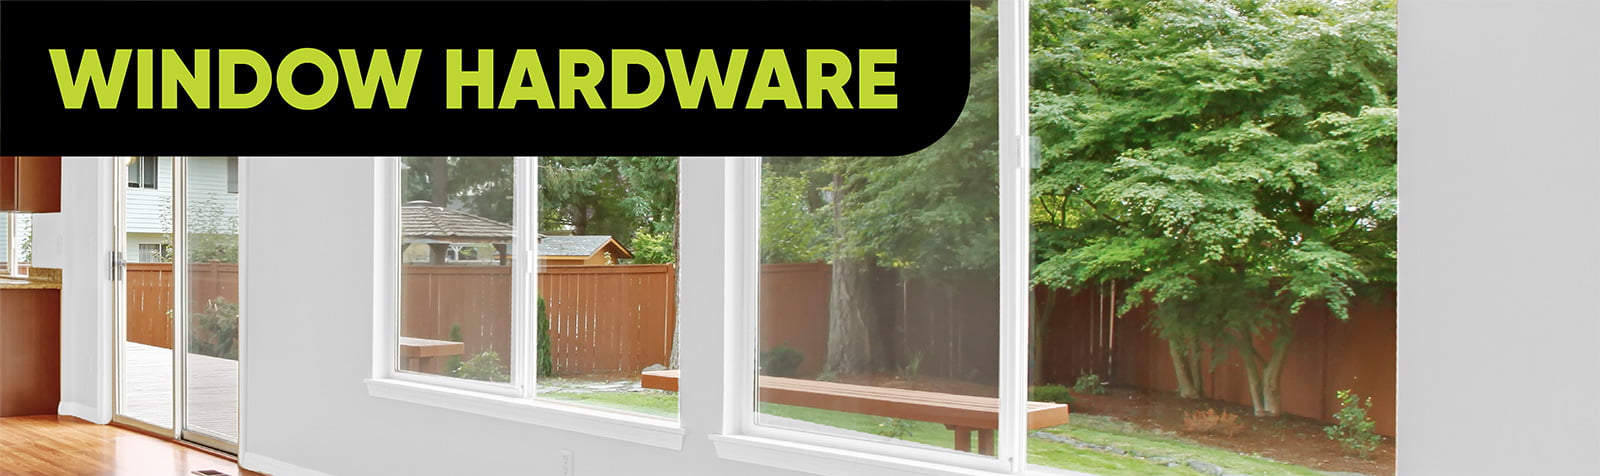 Window Hardware Category Banner